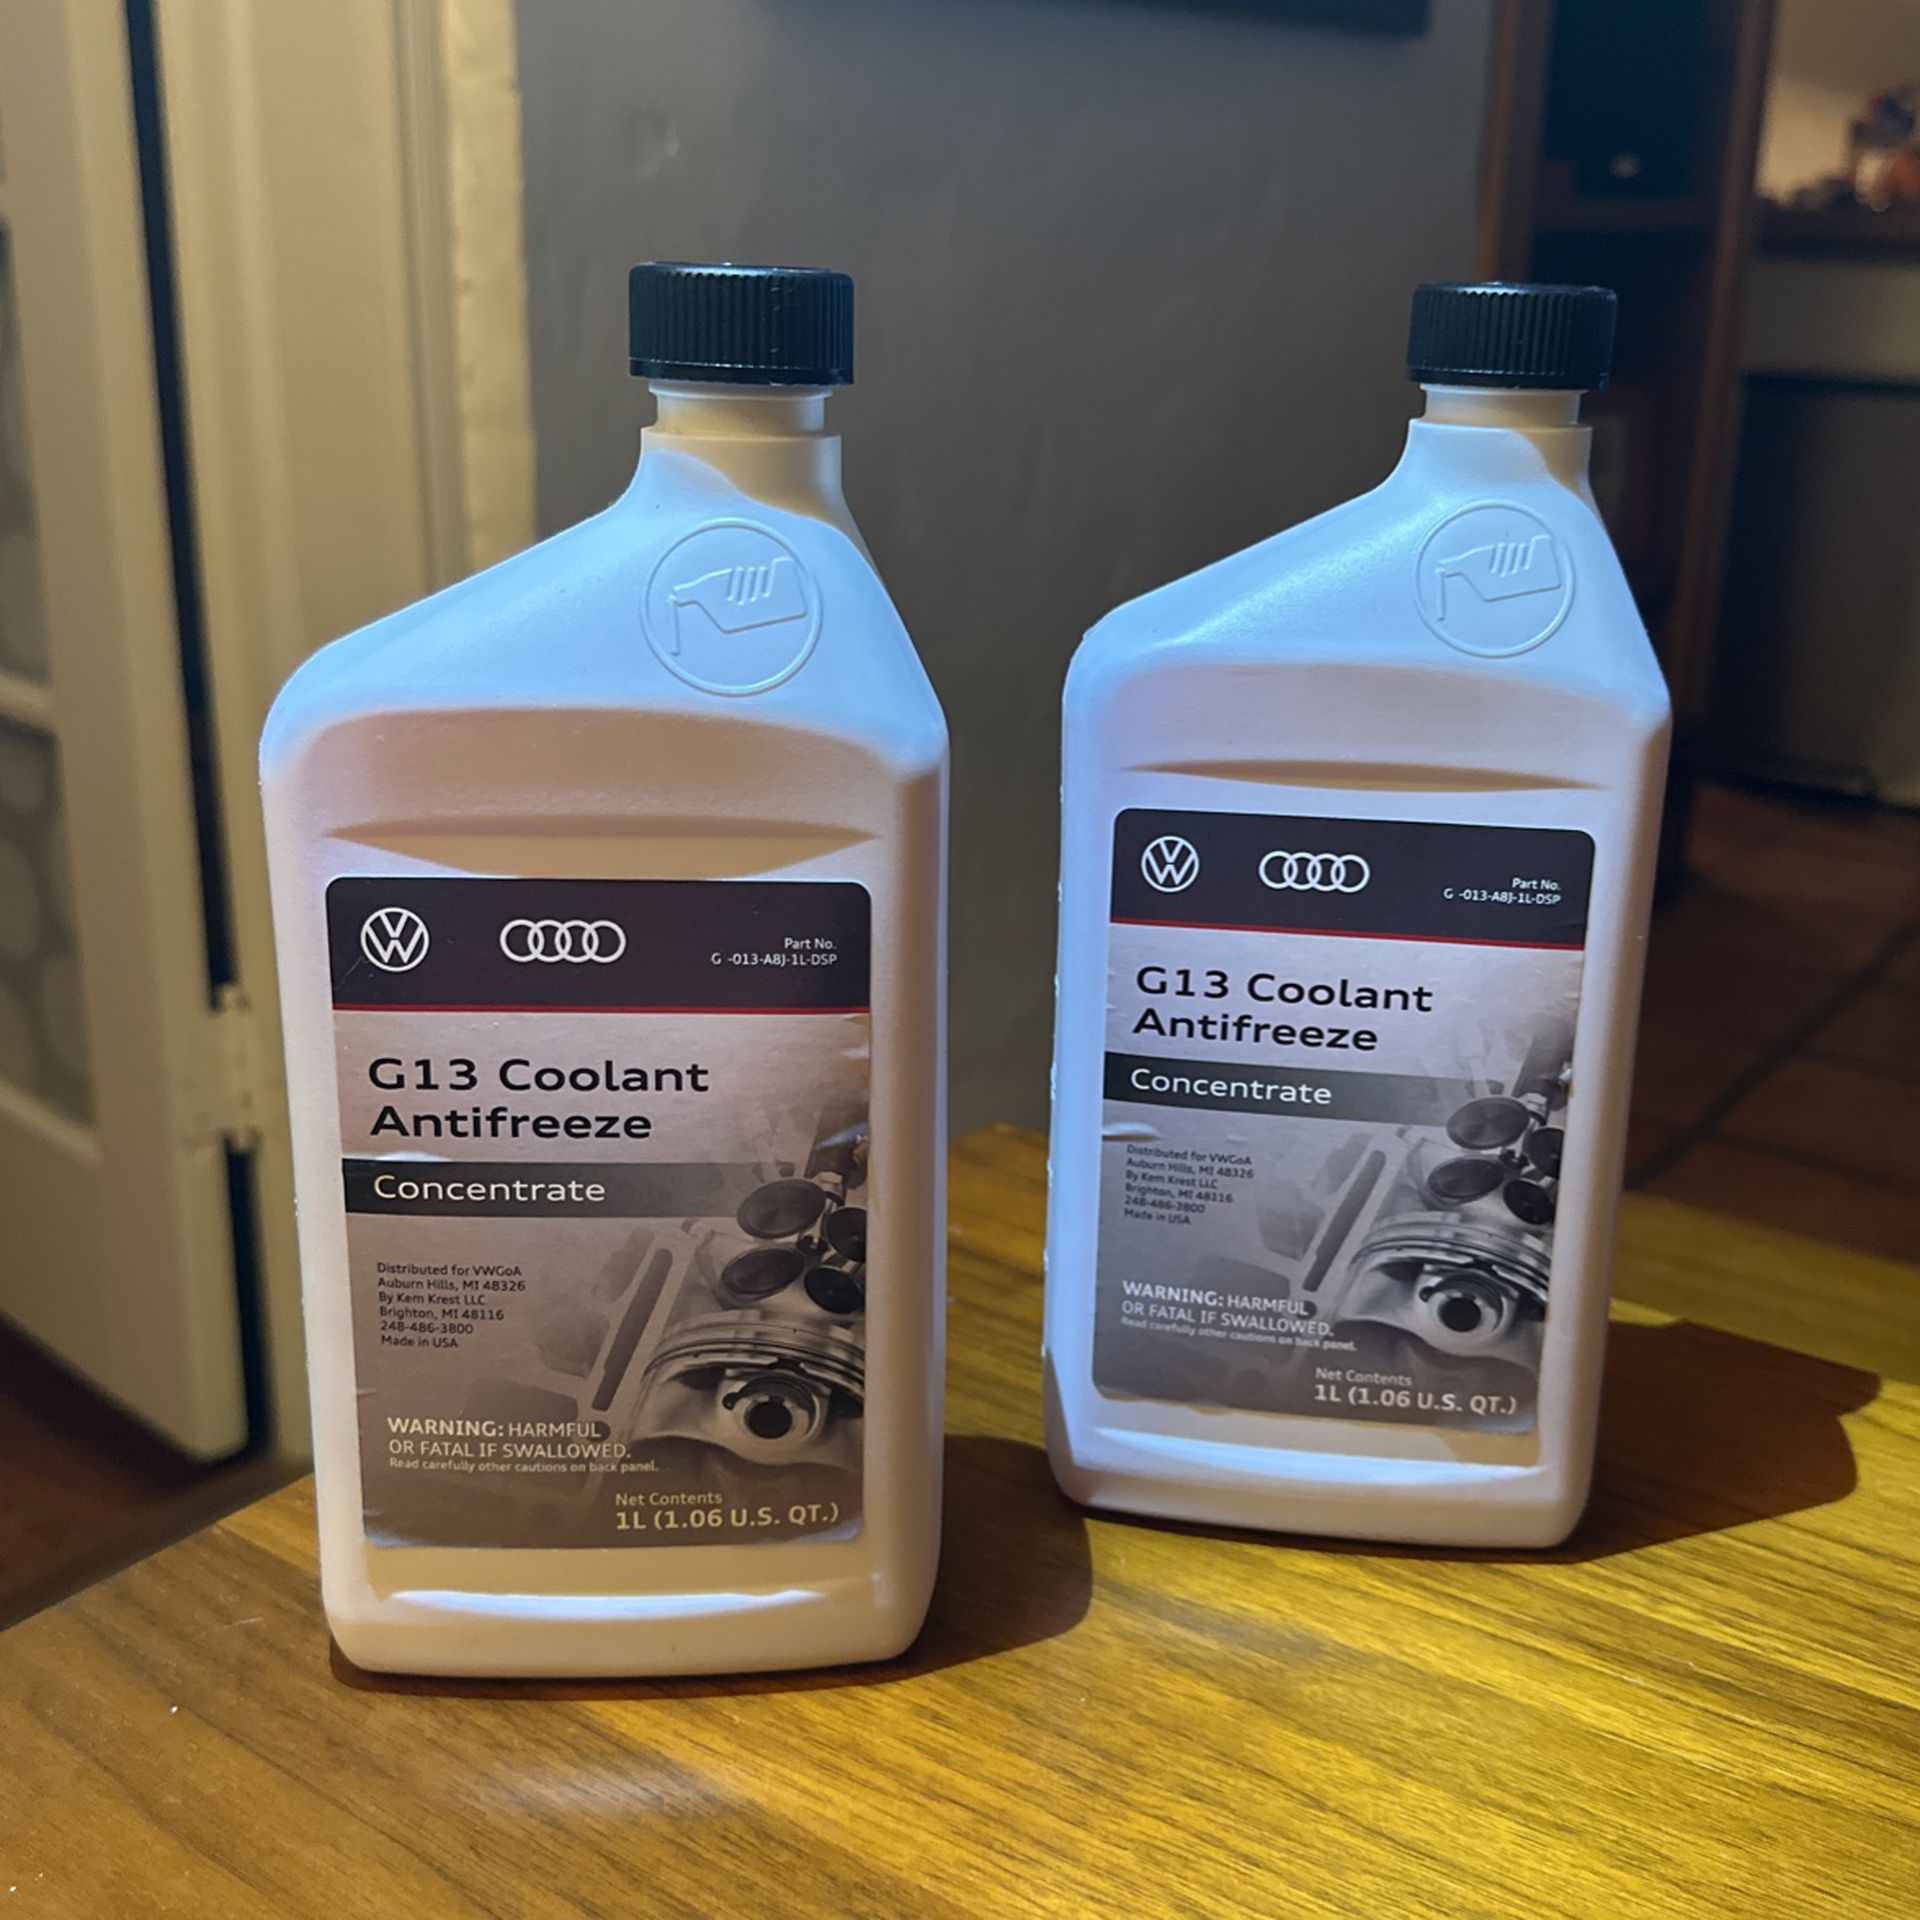 VW & Audi OEM G13 Coolant Antifreeze Concentrate 1 Liter for Sale in Miami,  FL - OfferUp